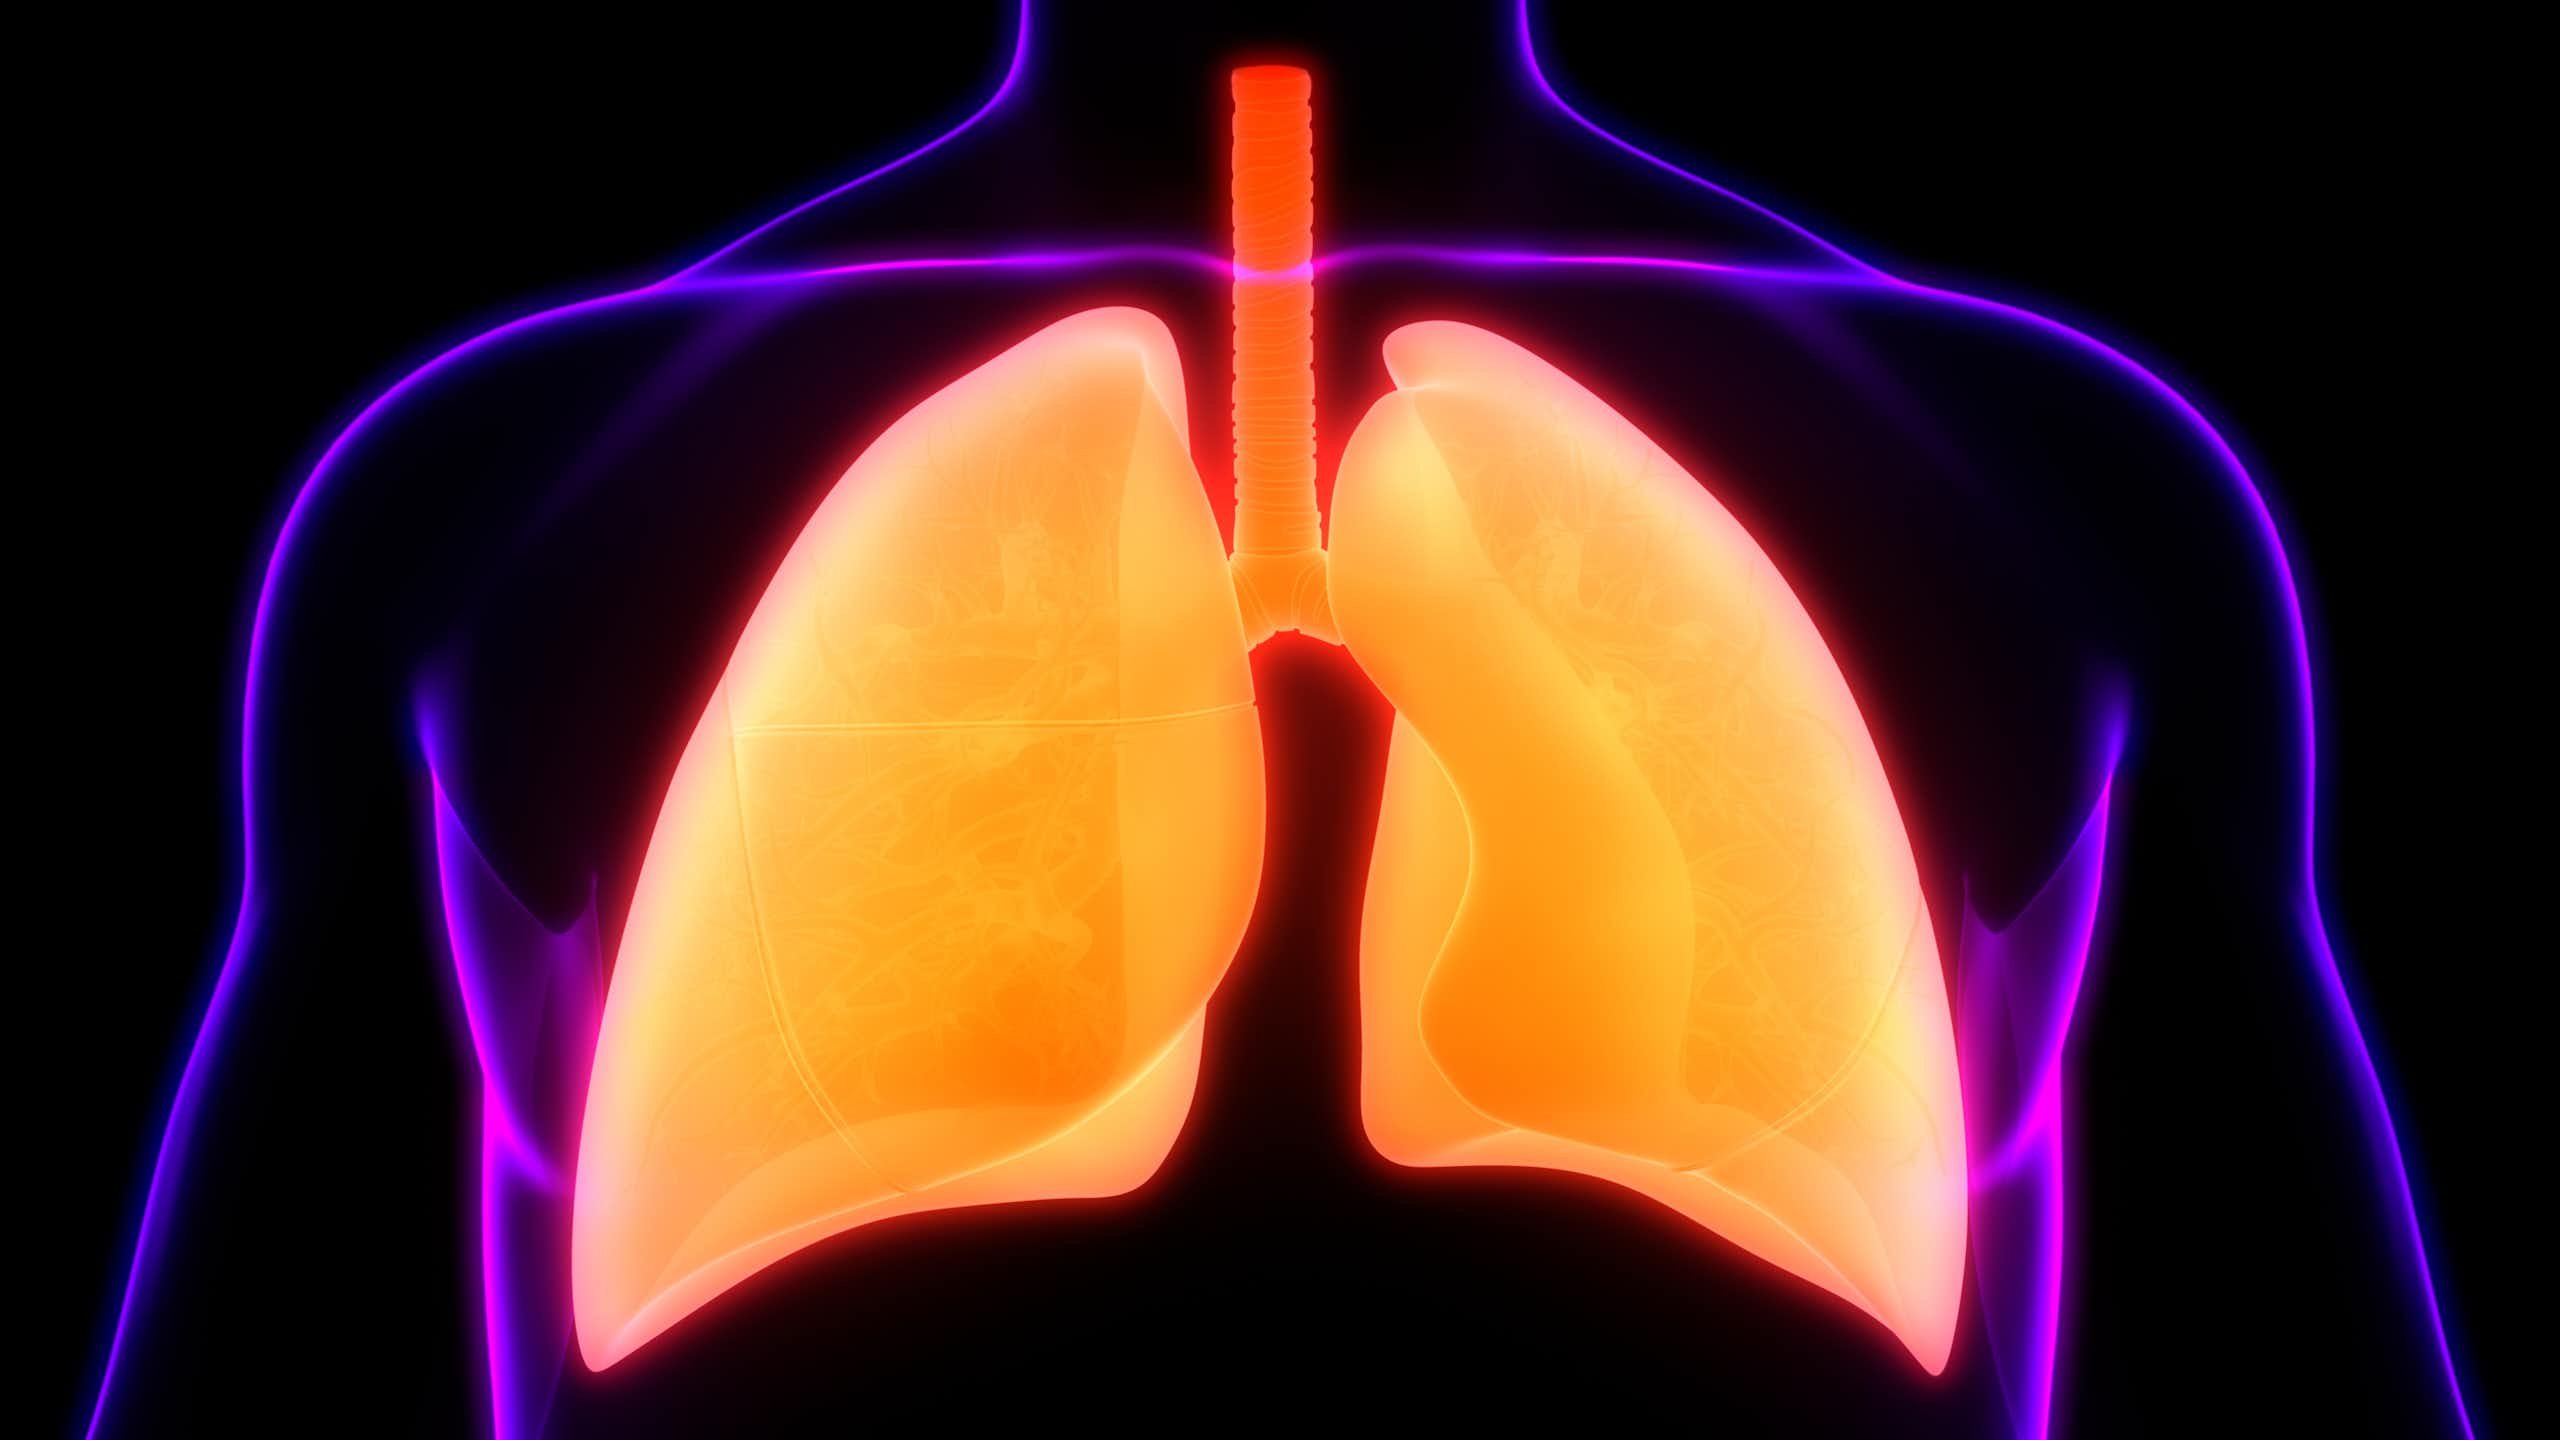 Illustration of golden lungs in the silhouette of a person's chest